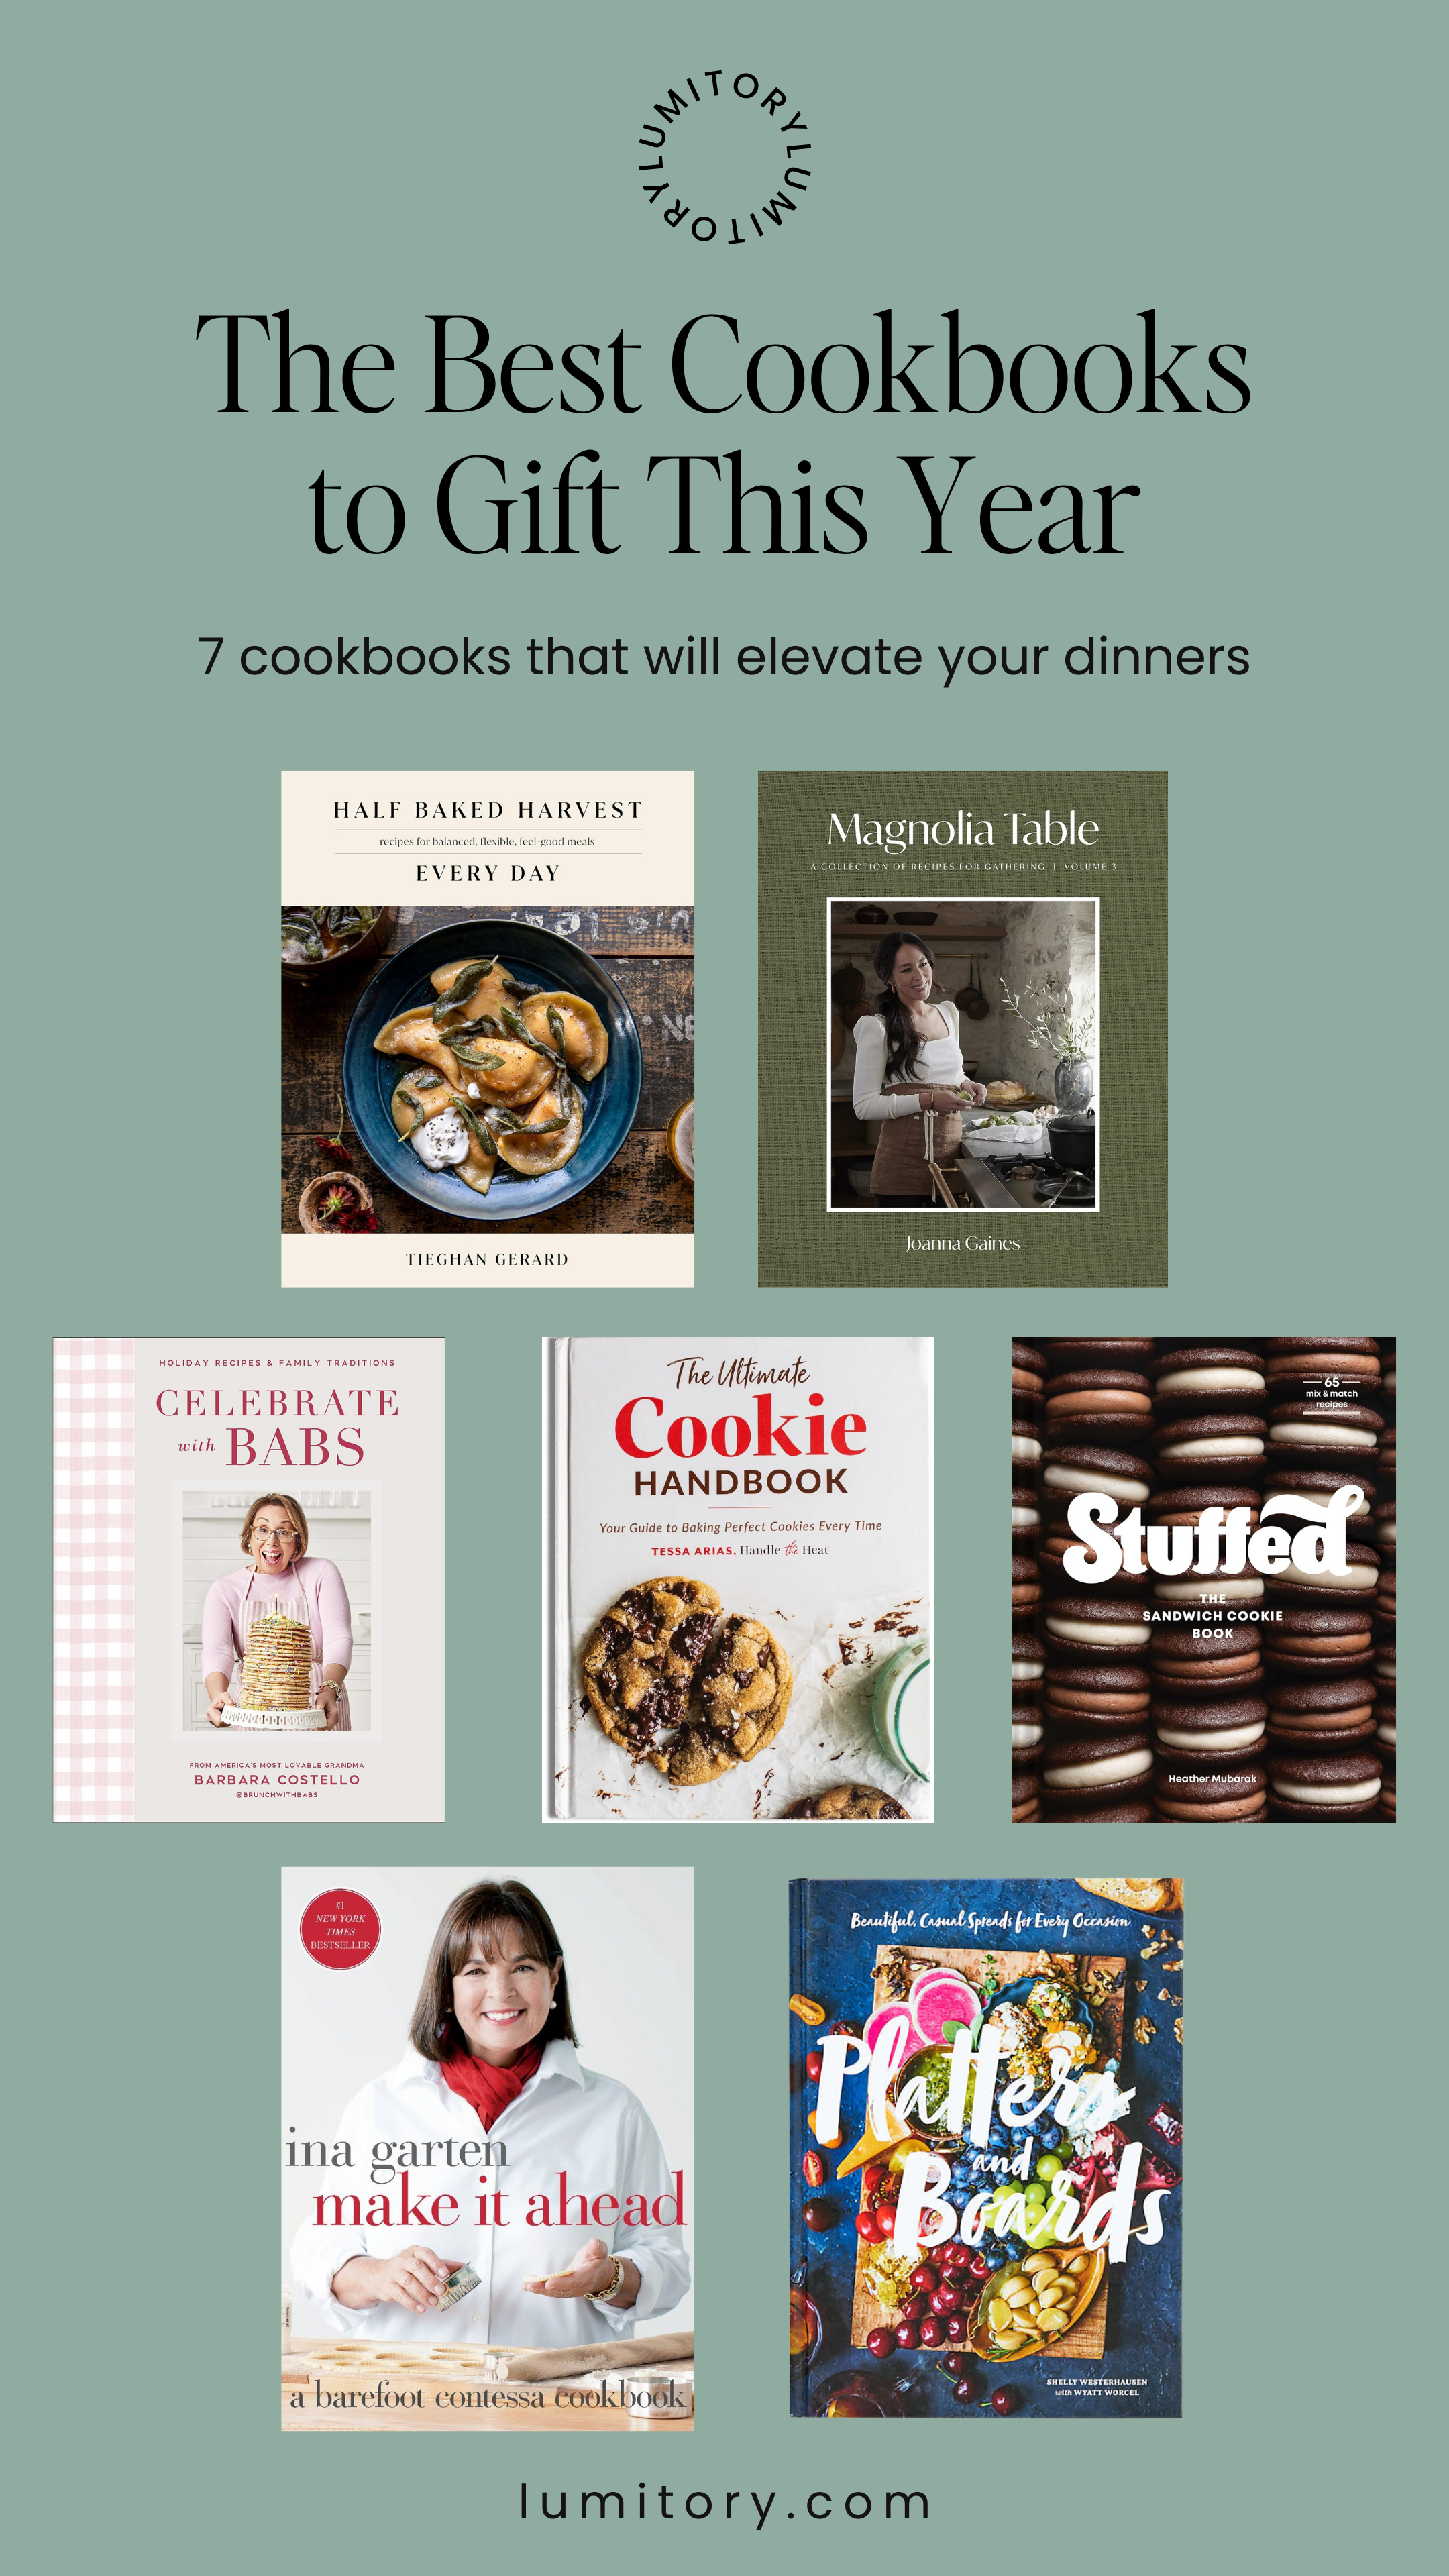 the best cookbooks to gift this year. www.lumitory.com